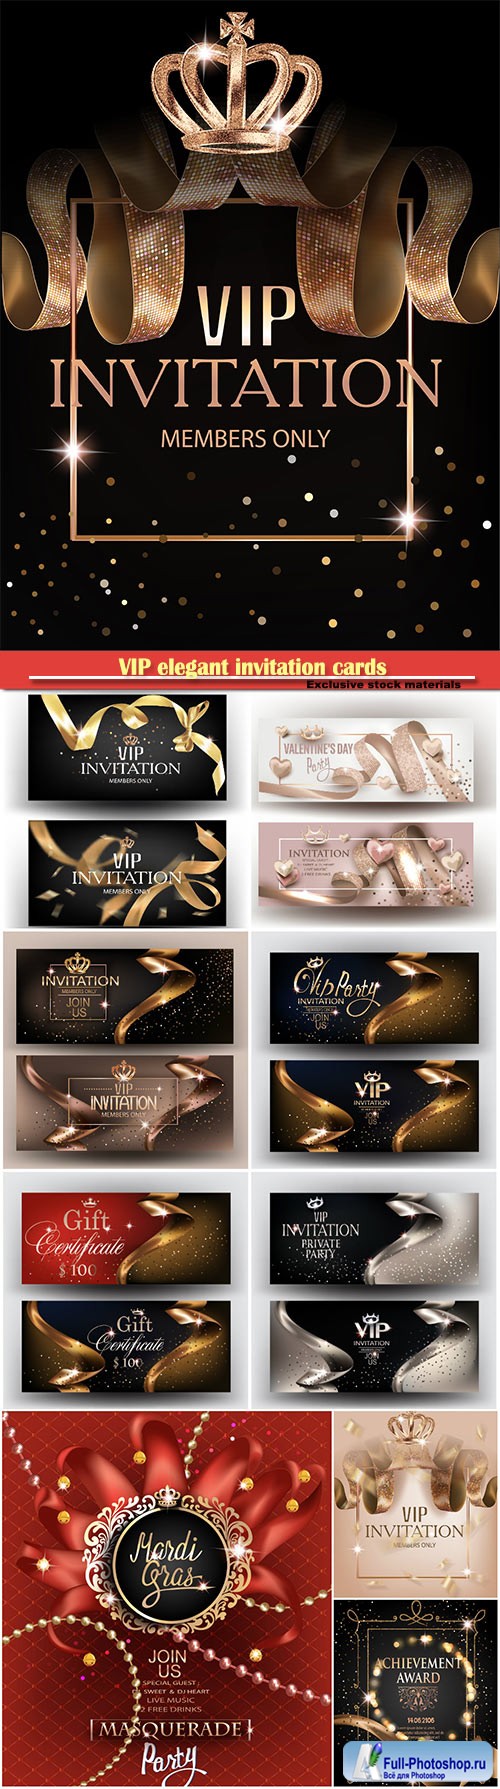 VIP elegant invitation cards with gold ribbons, pattern, crown and  frame and gold dust